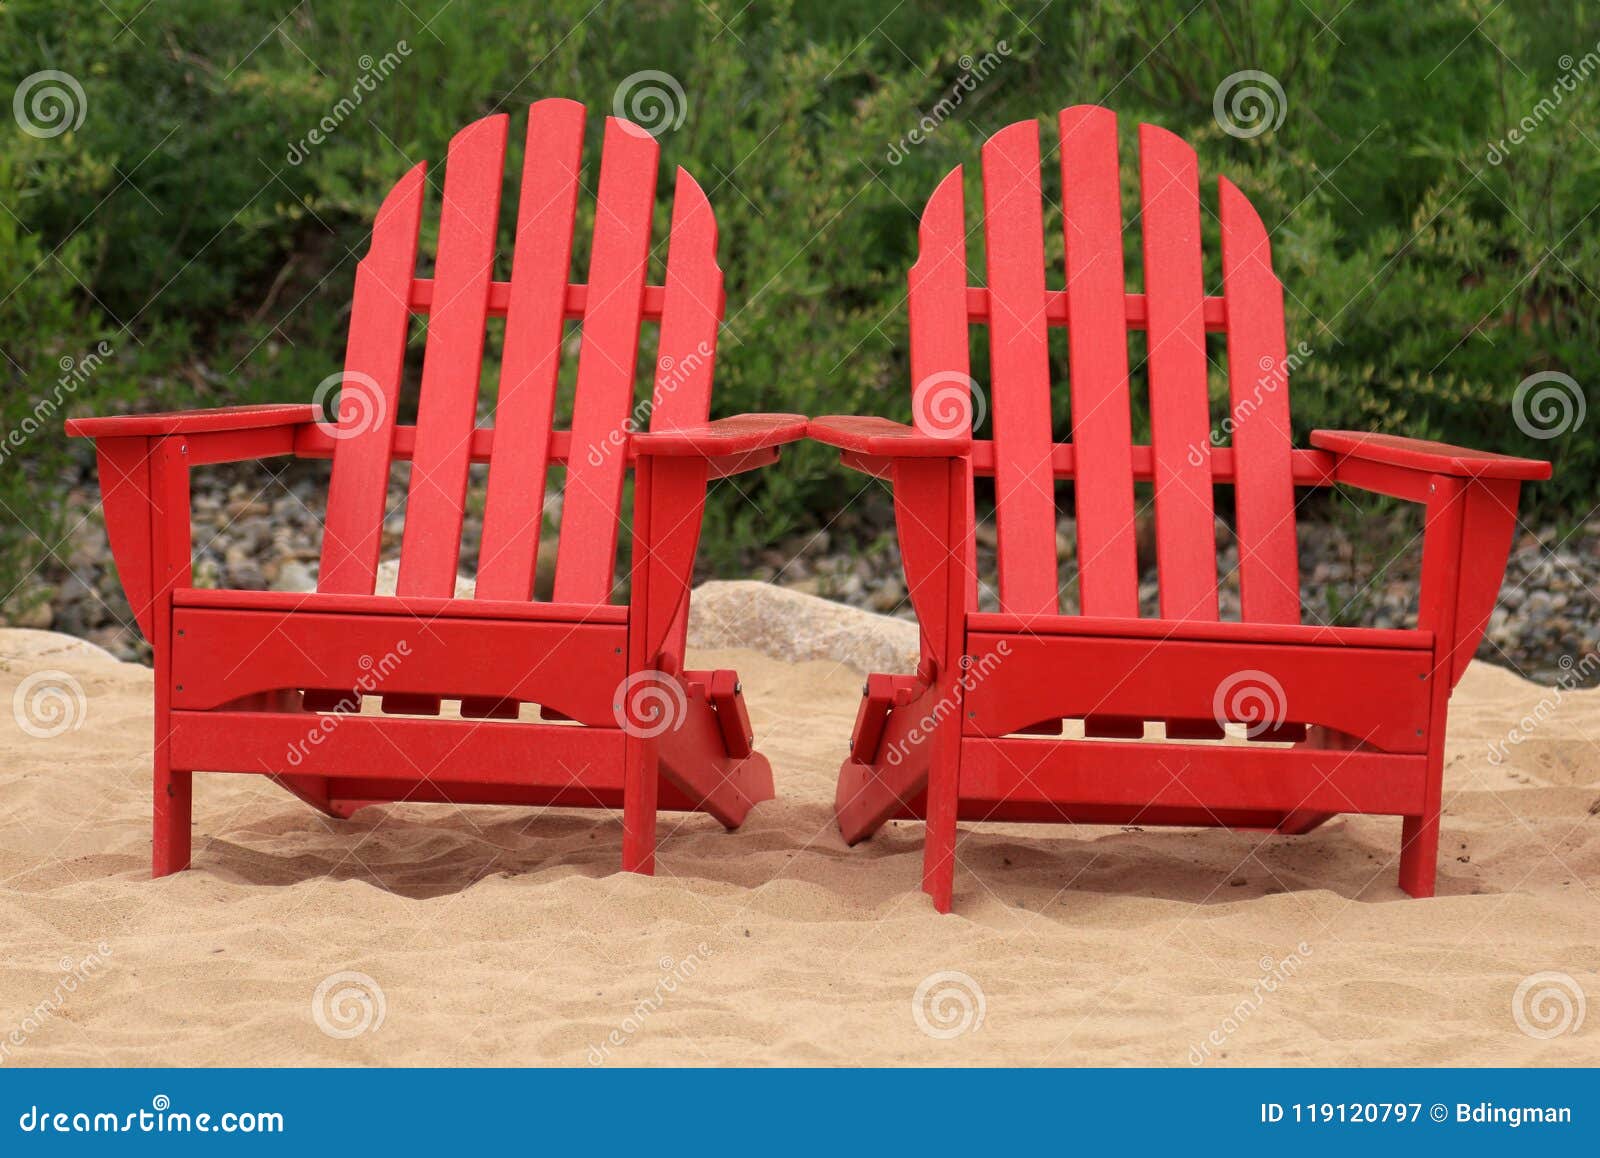 Colorful Adirondack Chairs Stock Image Image Of Colorful 119120797